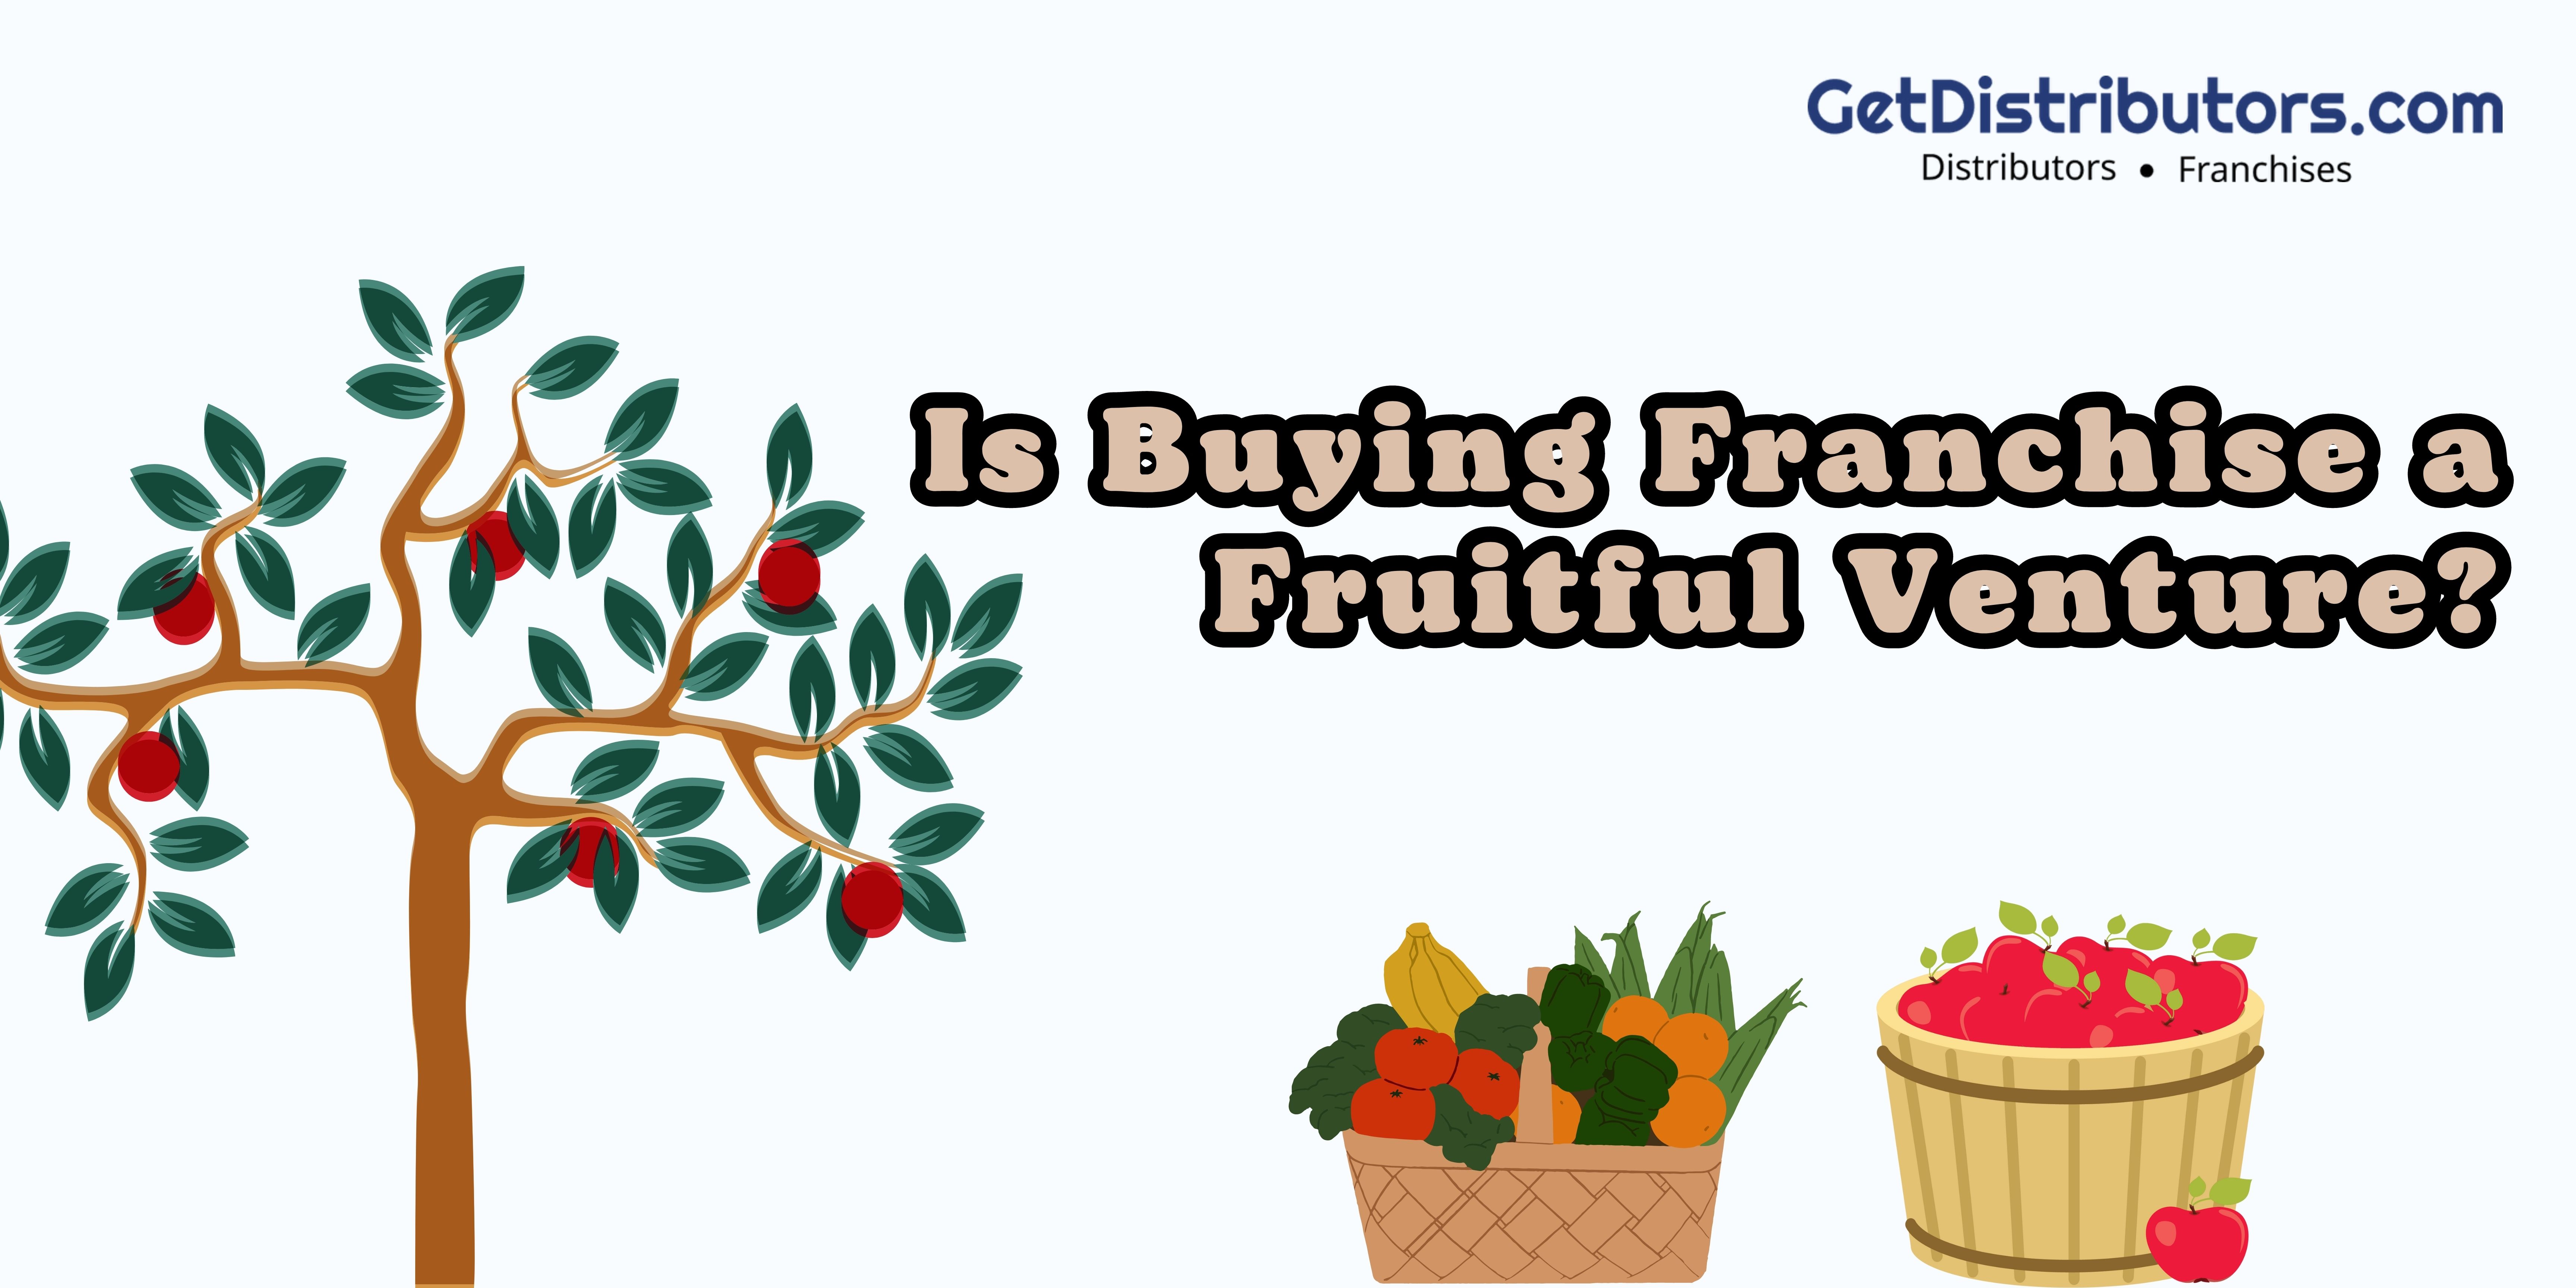 Is Buying Franchise a Fruitful Venture?